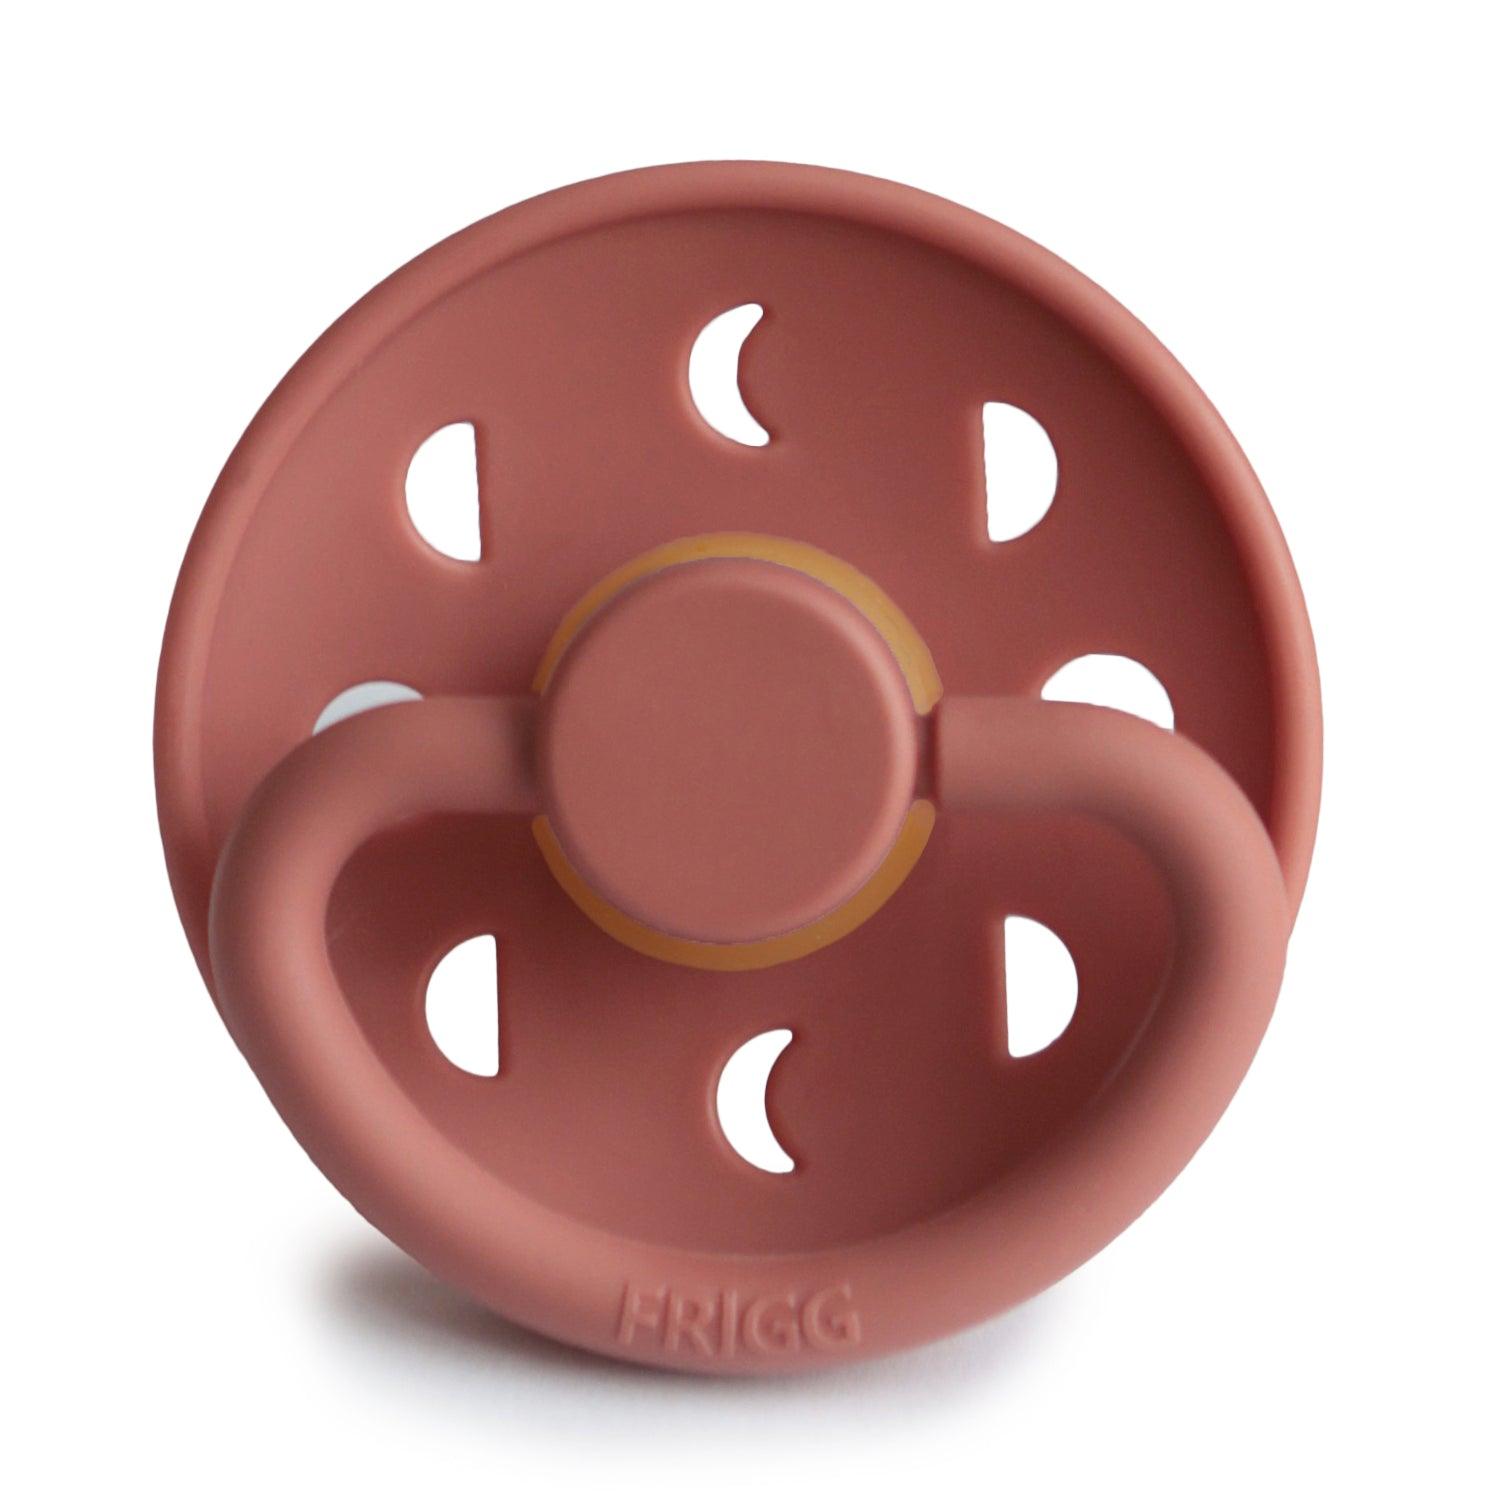 Moon Phase Latex Pacifier 0-6 Months - Ourkids - Frigg